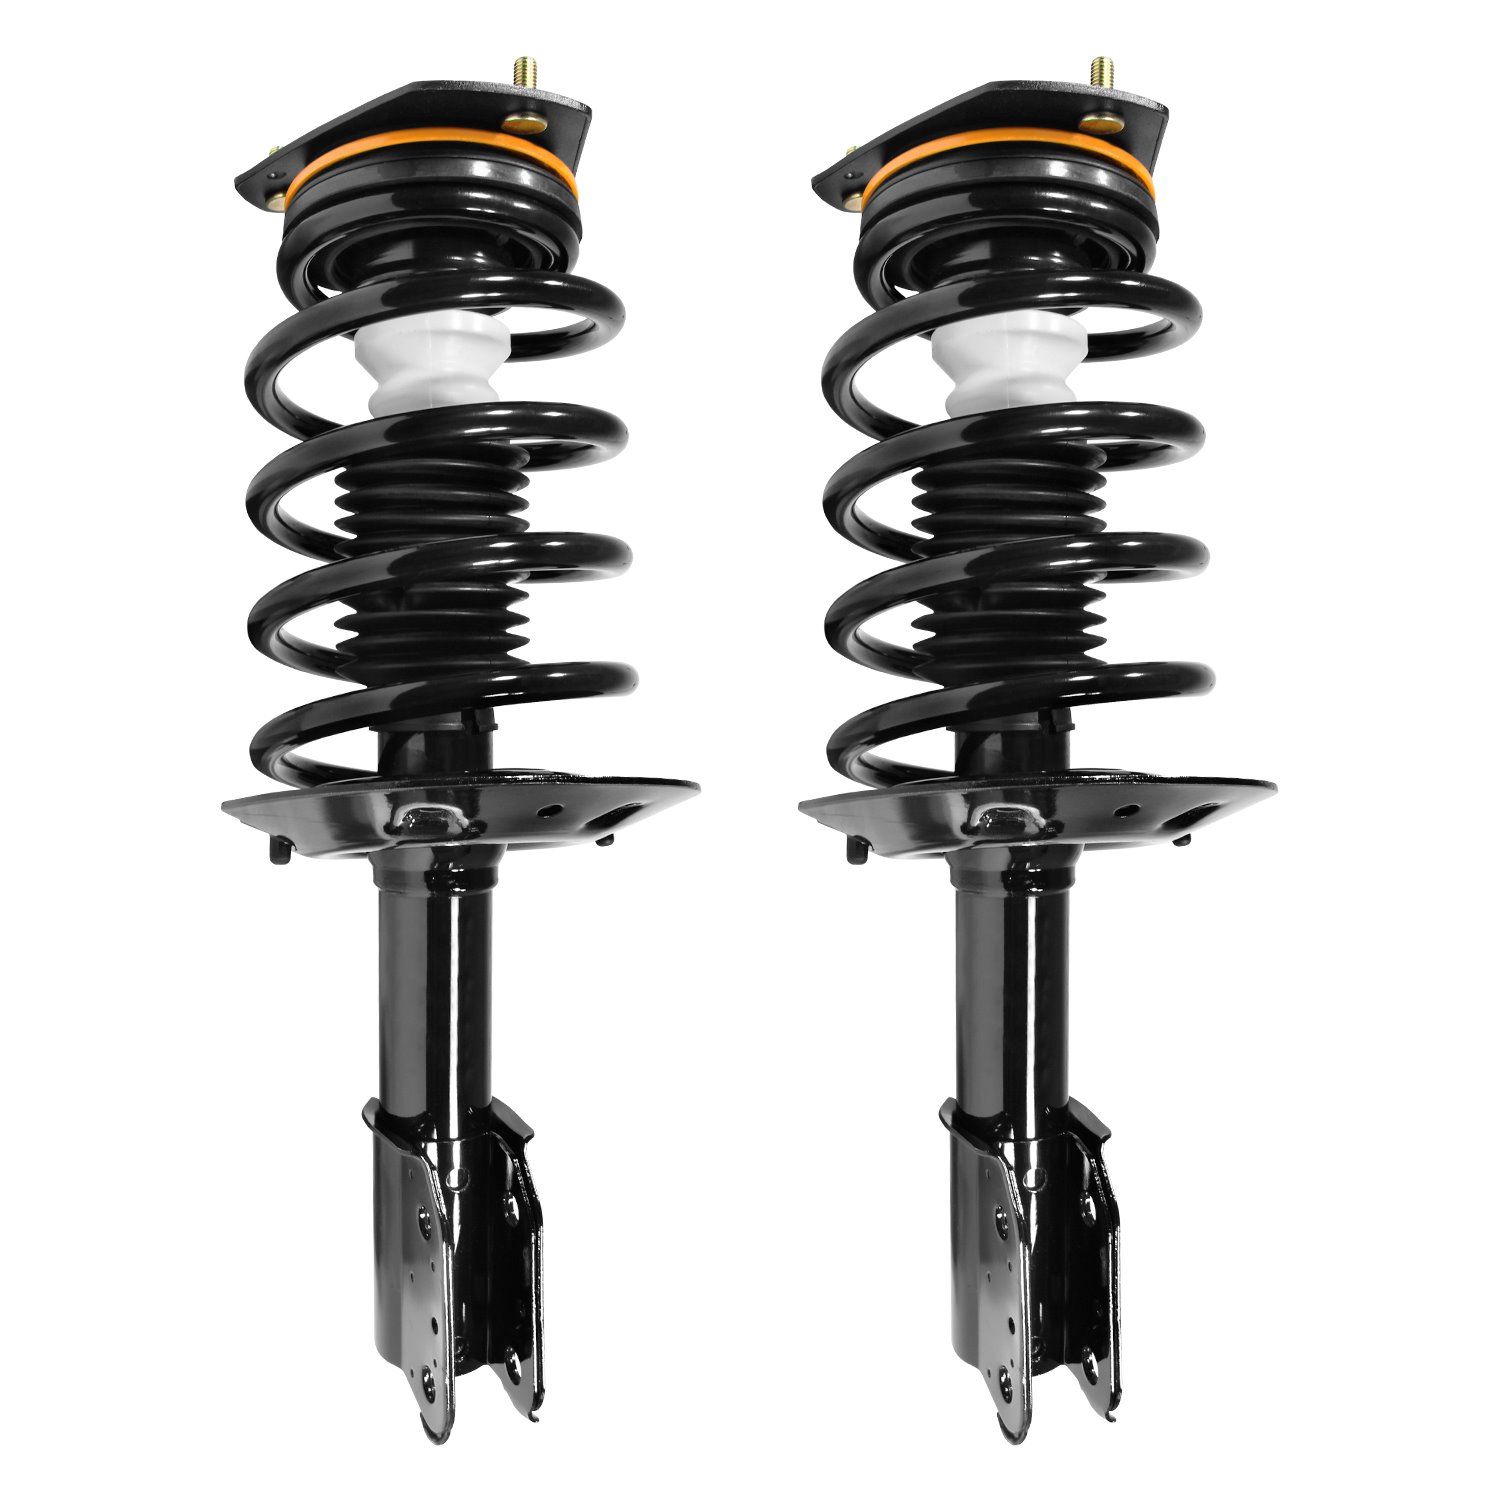 2-11130-001 Suspension Strut & Coil Spring Assembly Set Fits Select Chevy Impala, Oldsmobile Intrigue